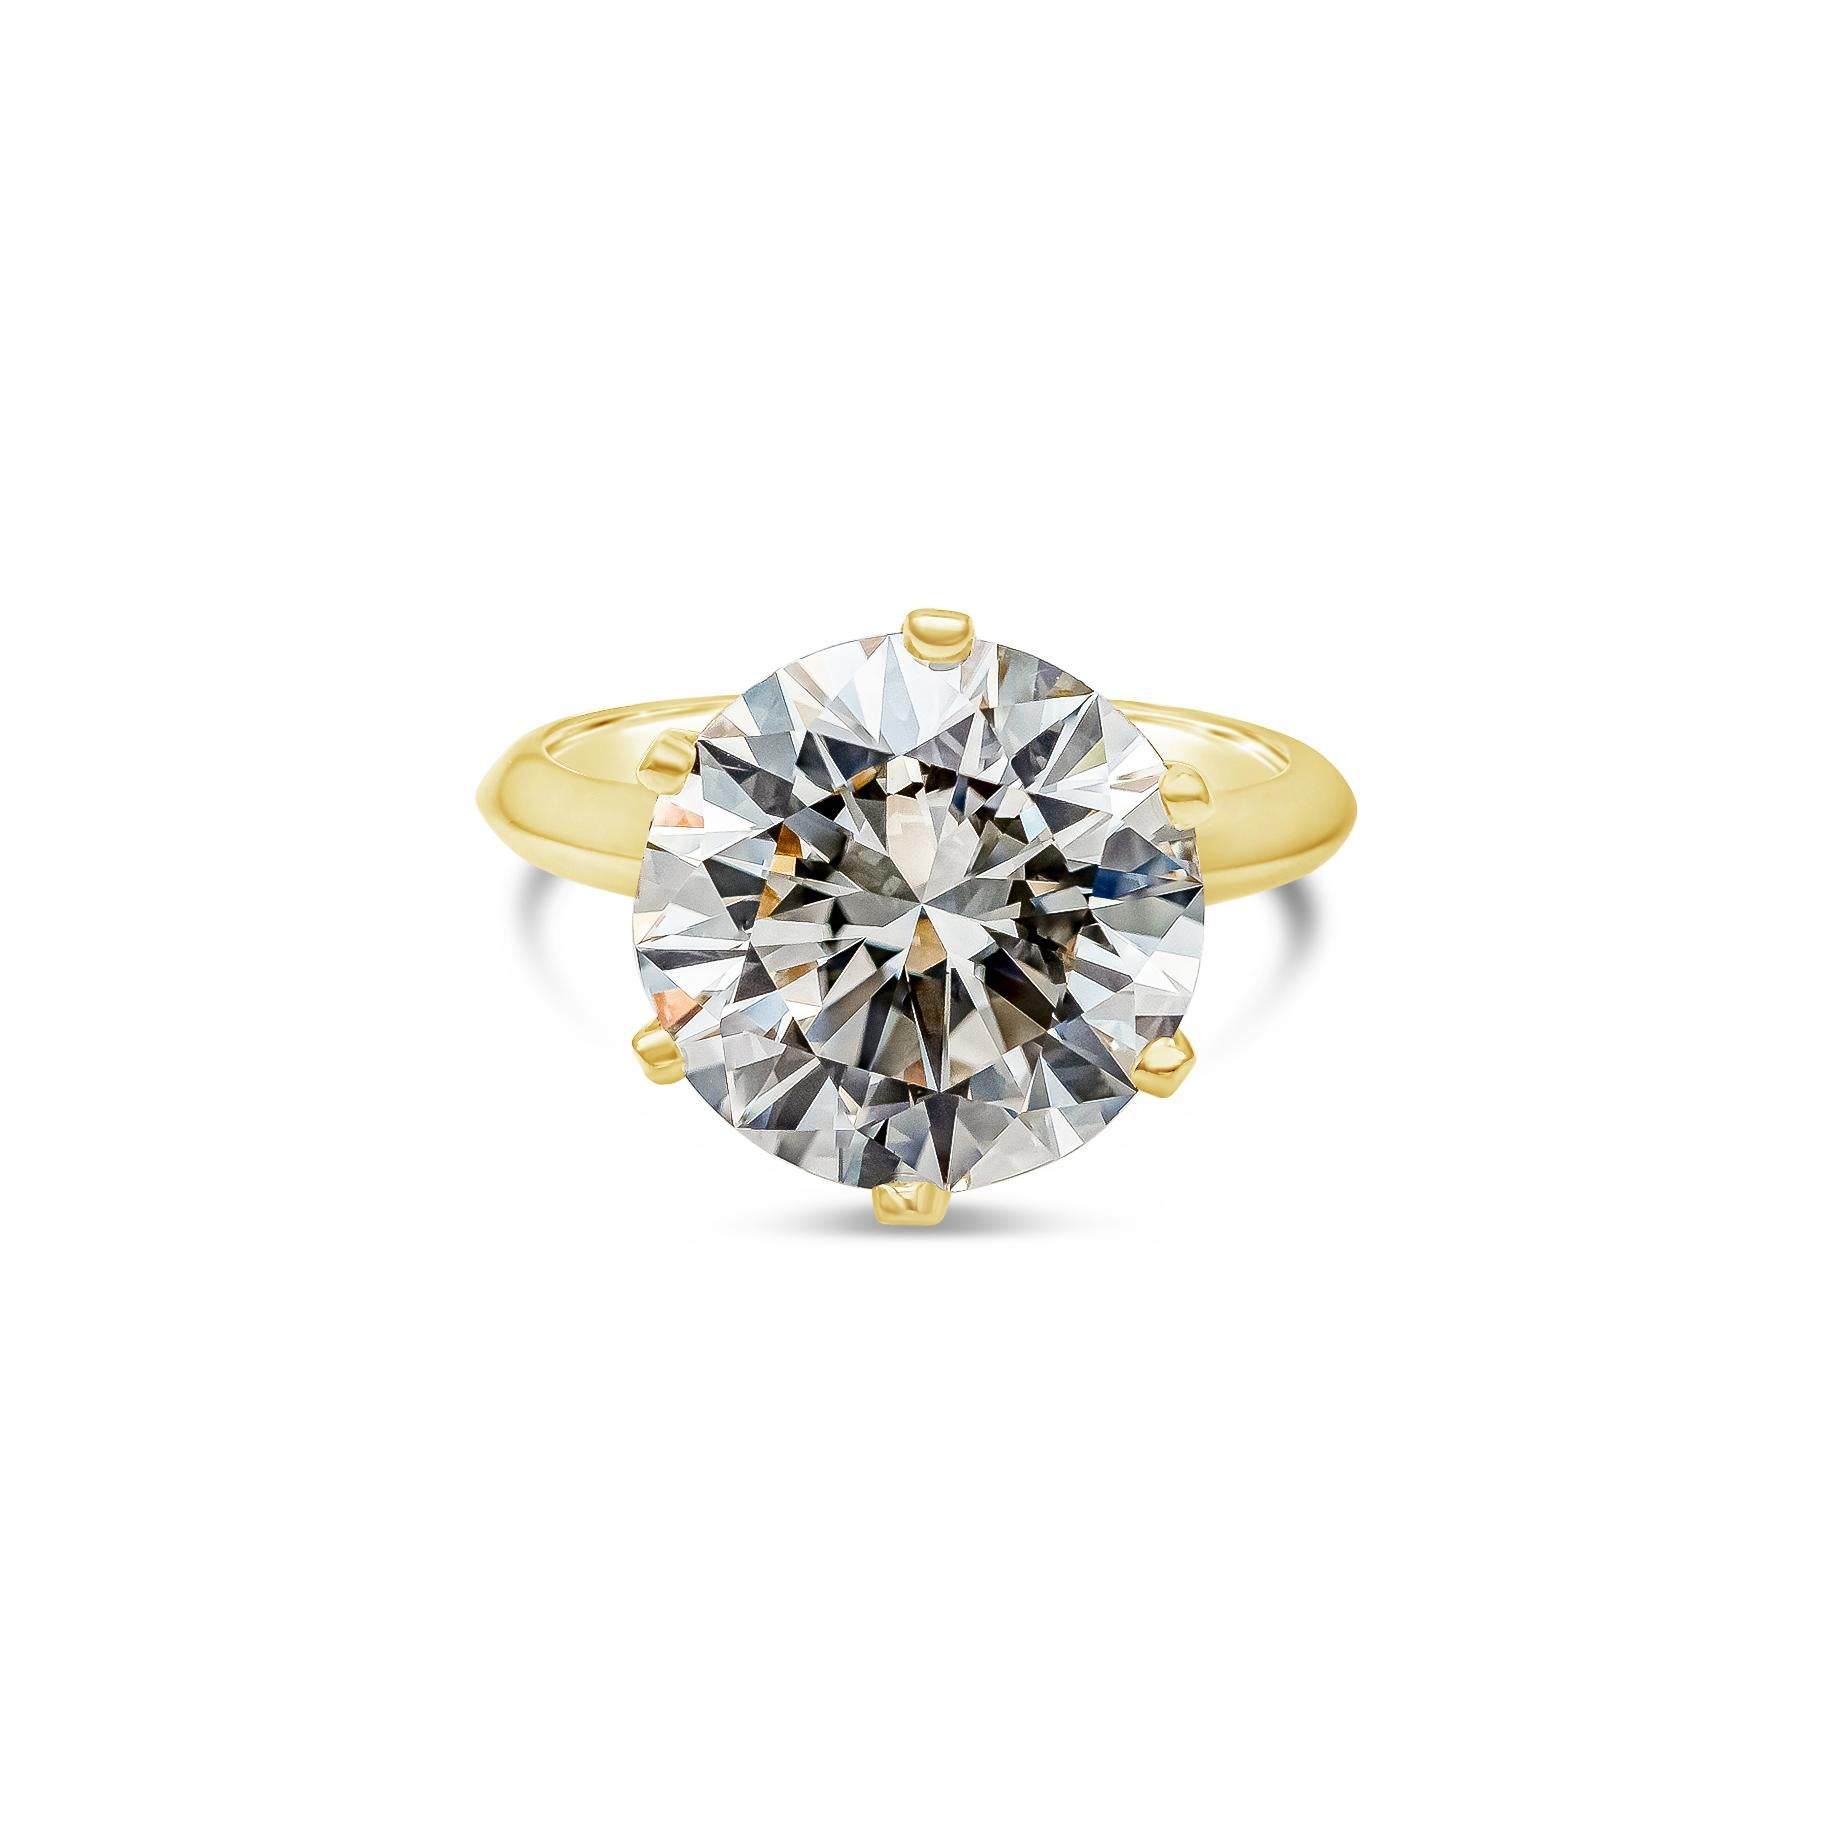 Women's GIA Certified 6.33 Carat Round Diamond Solitaire Engagement Ring